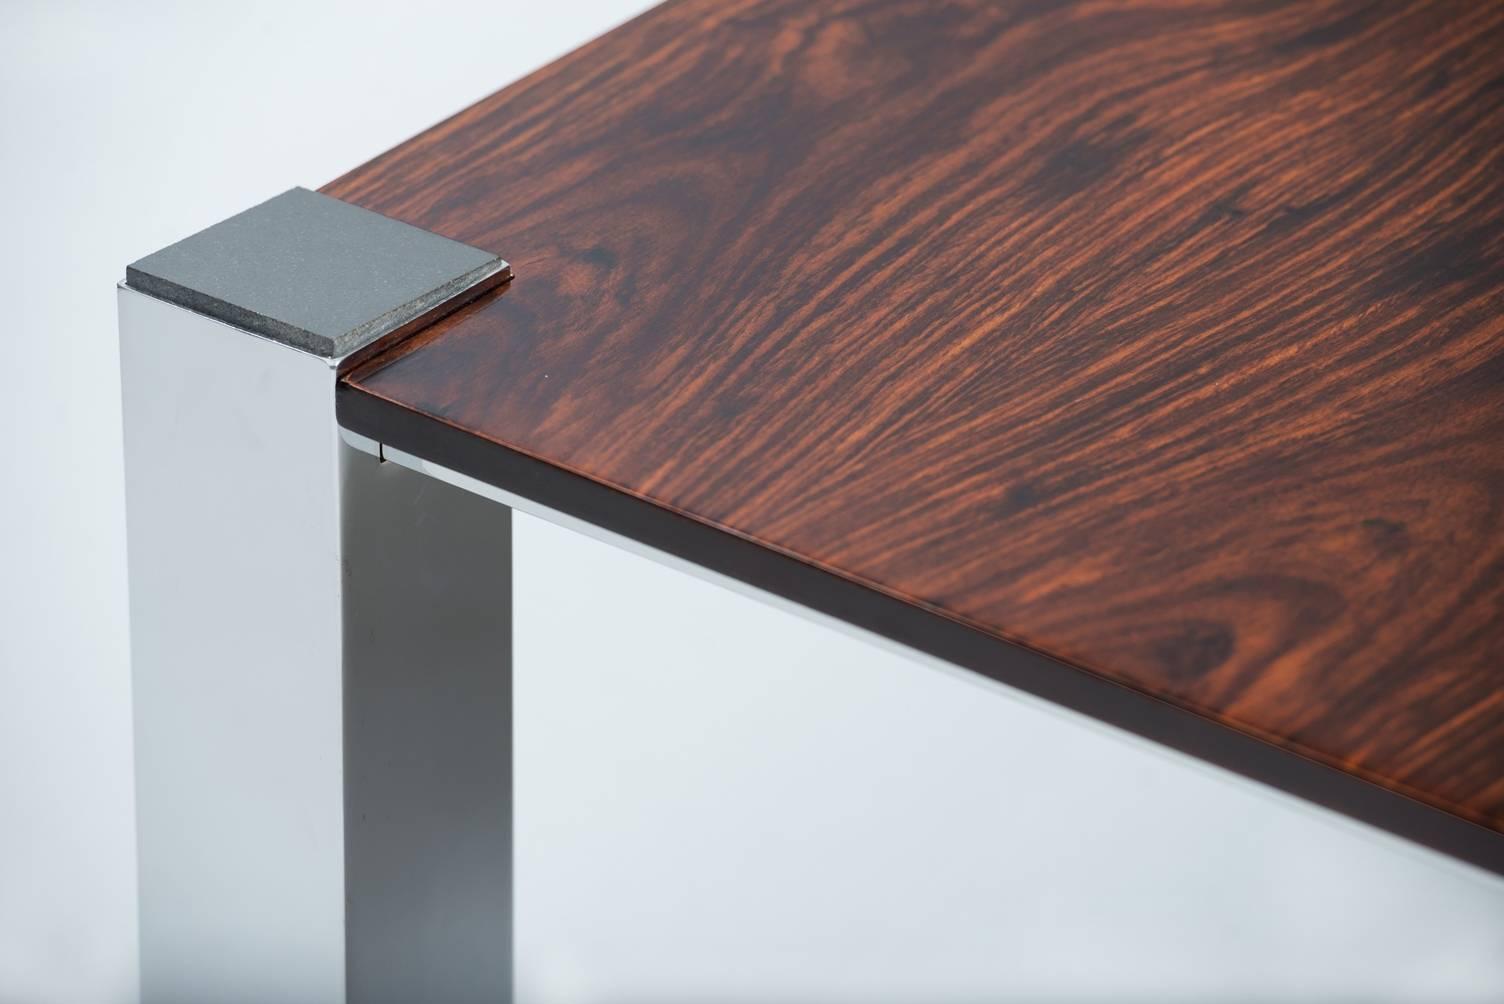 Rosewood and chrome coffee table with granite tops on the chrome legs.